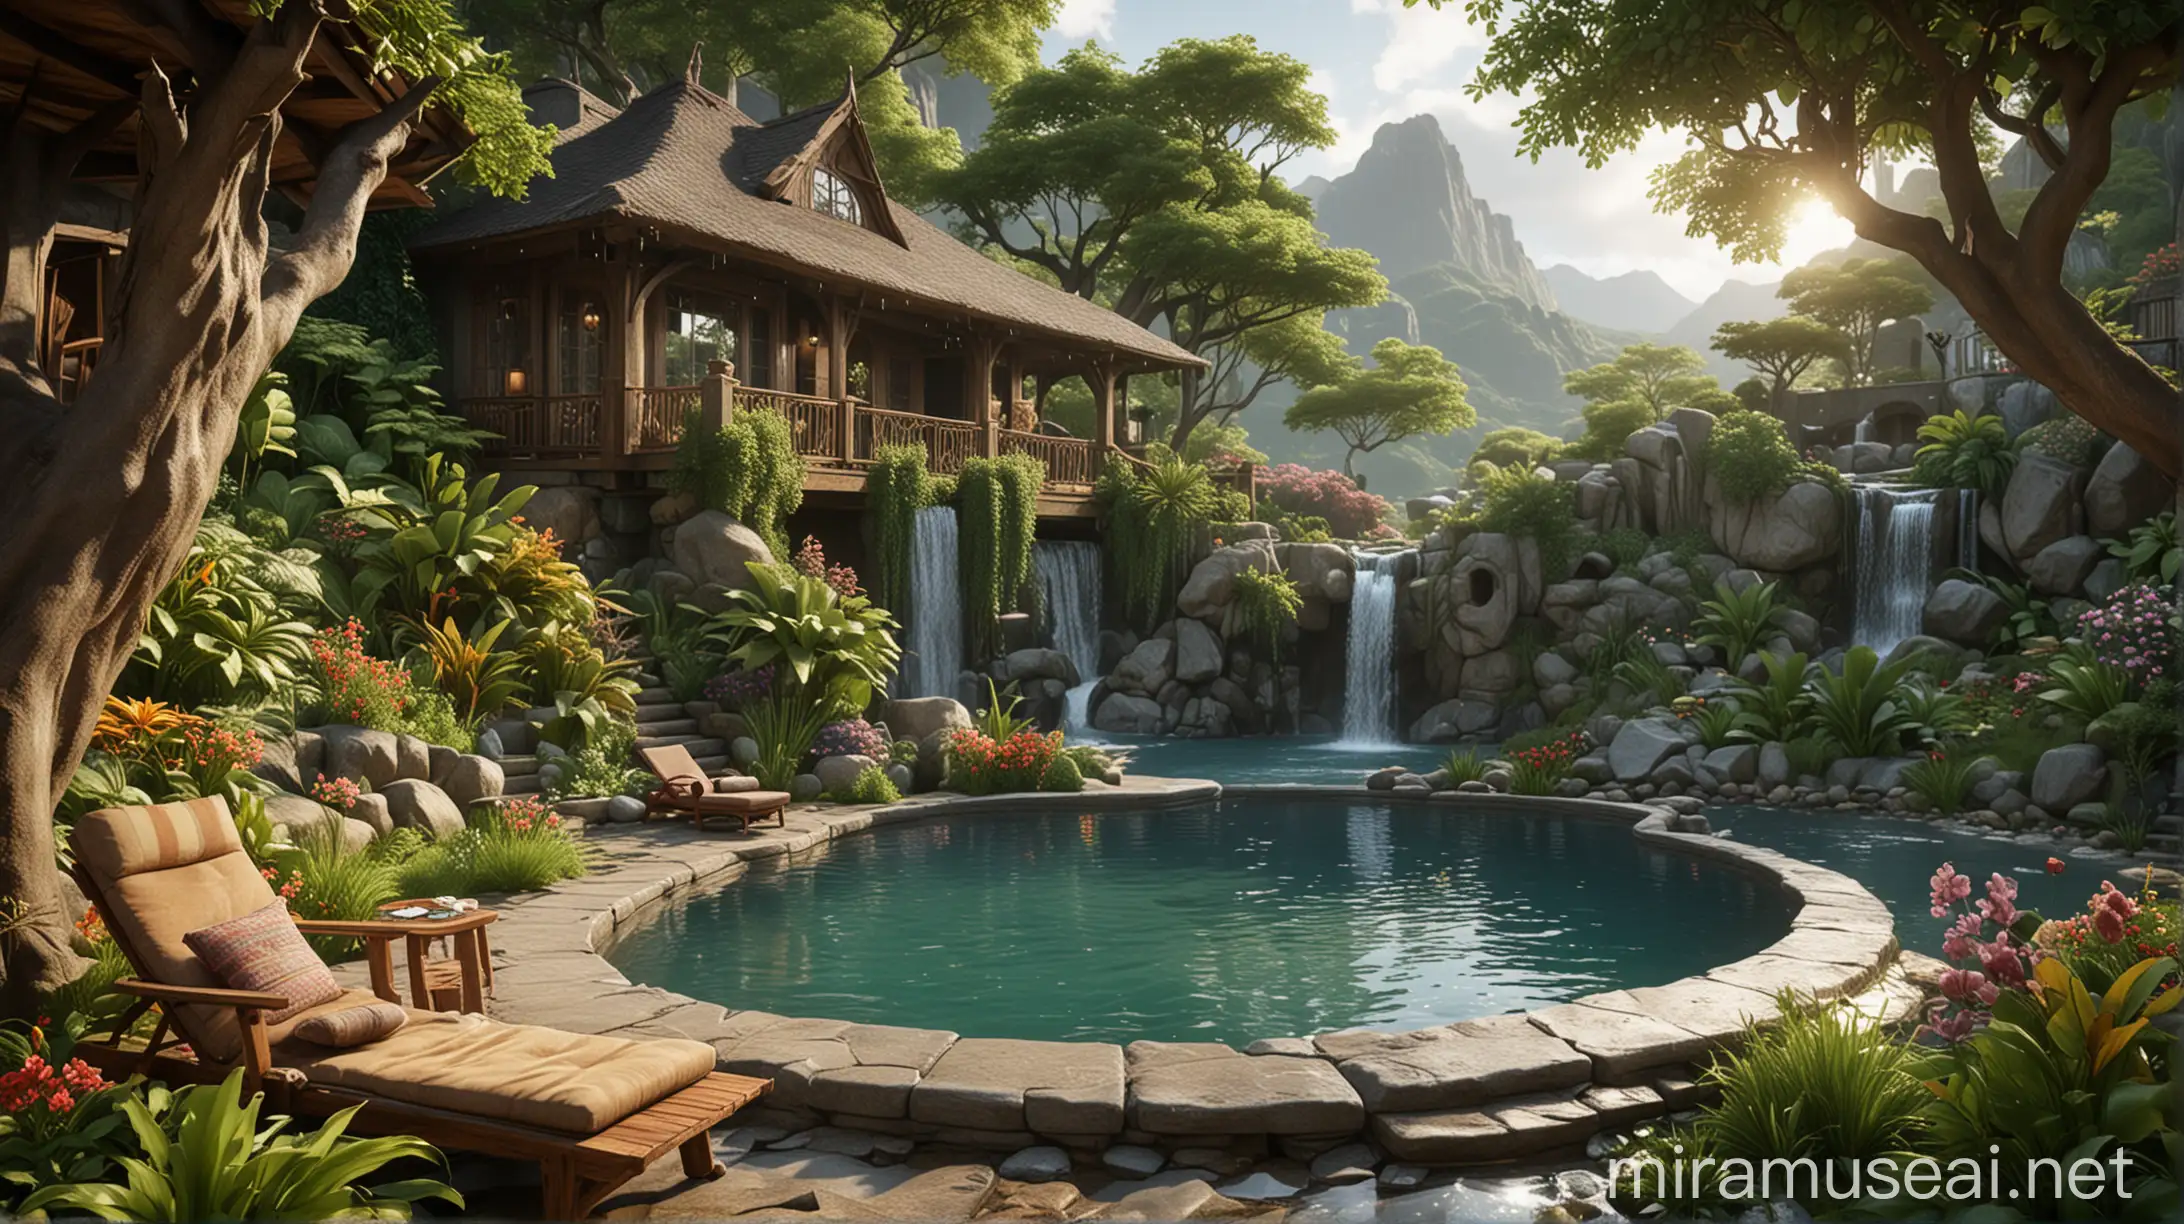 Mountain Waterfall Hobbit House Interior View with Crystal Clear Lagoon